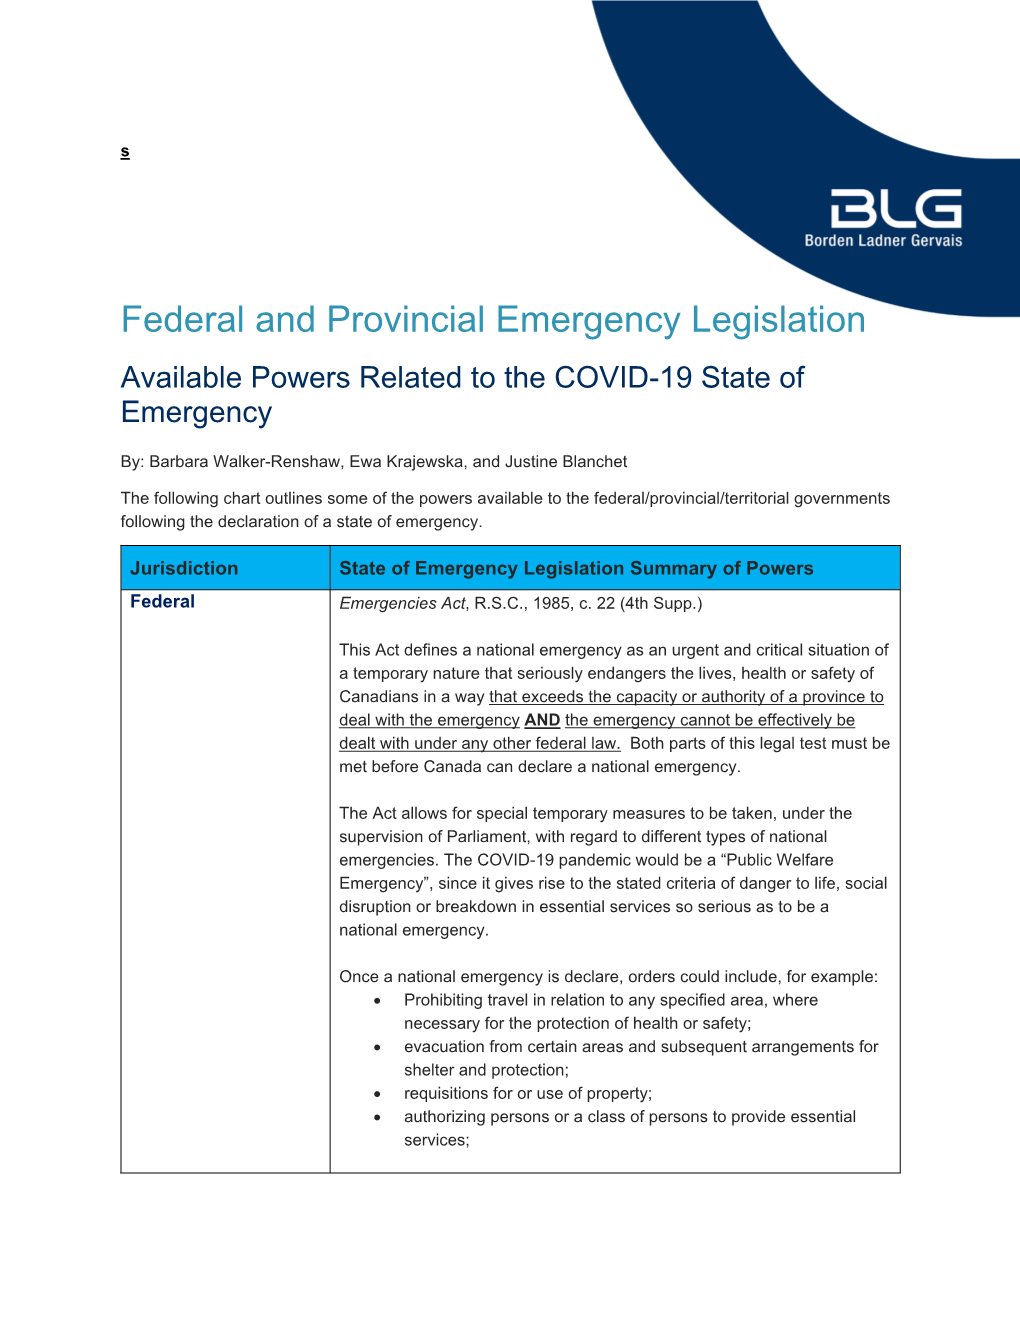 Federal and Provincial Emergency Legislation Available Powers Related to the COVID-19 State of Emergency